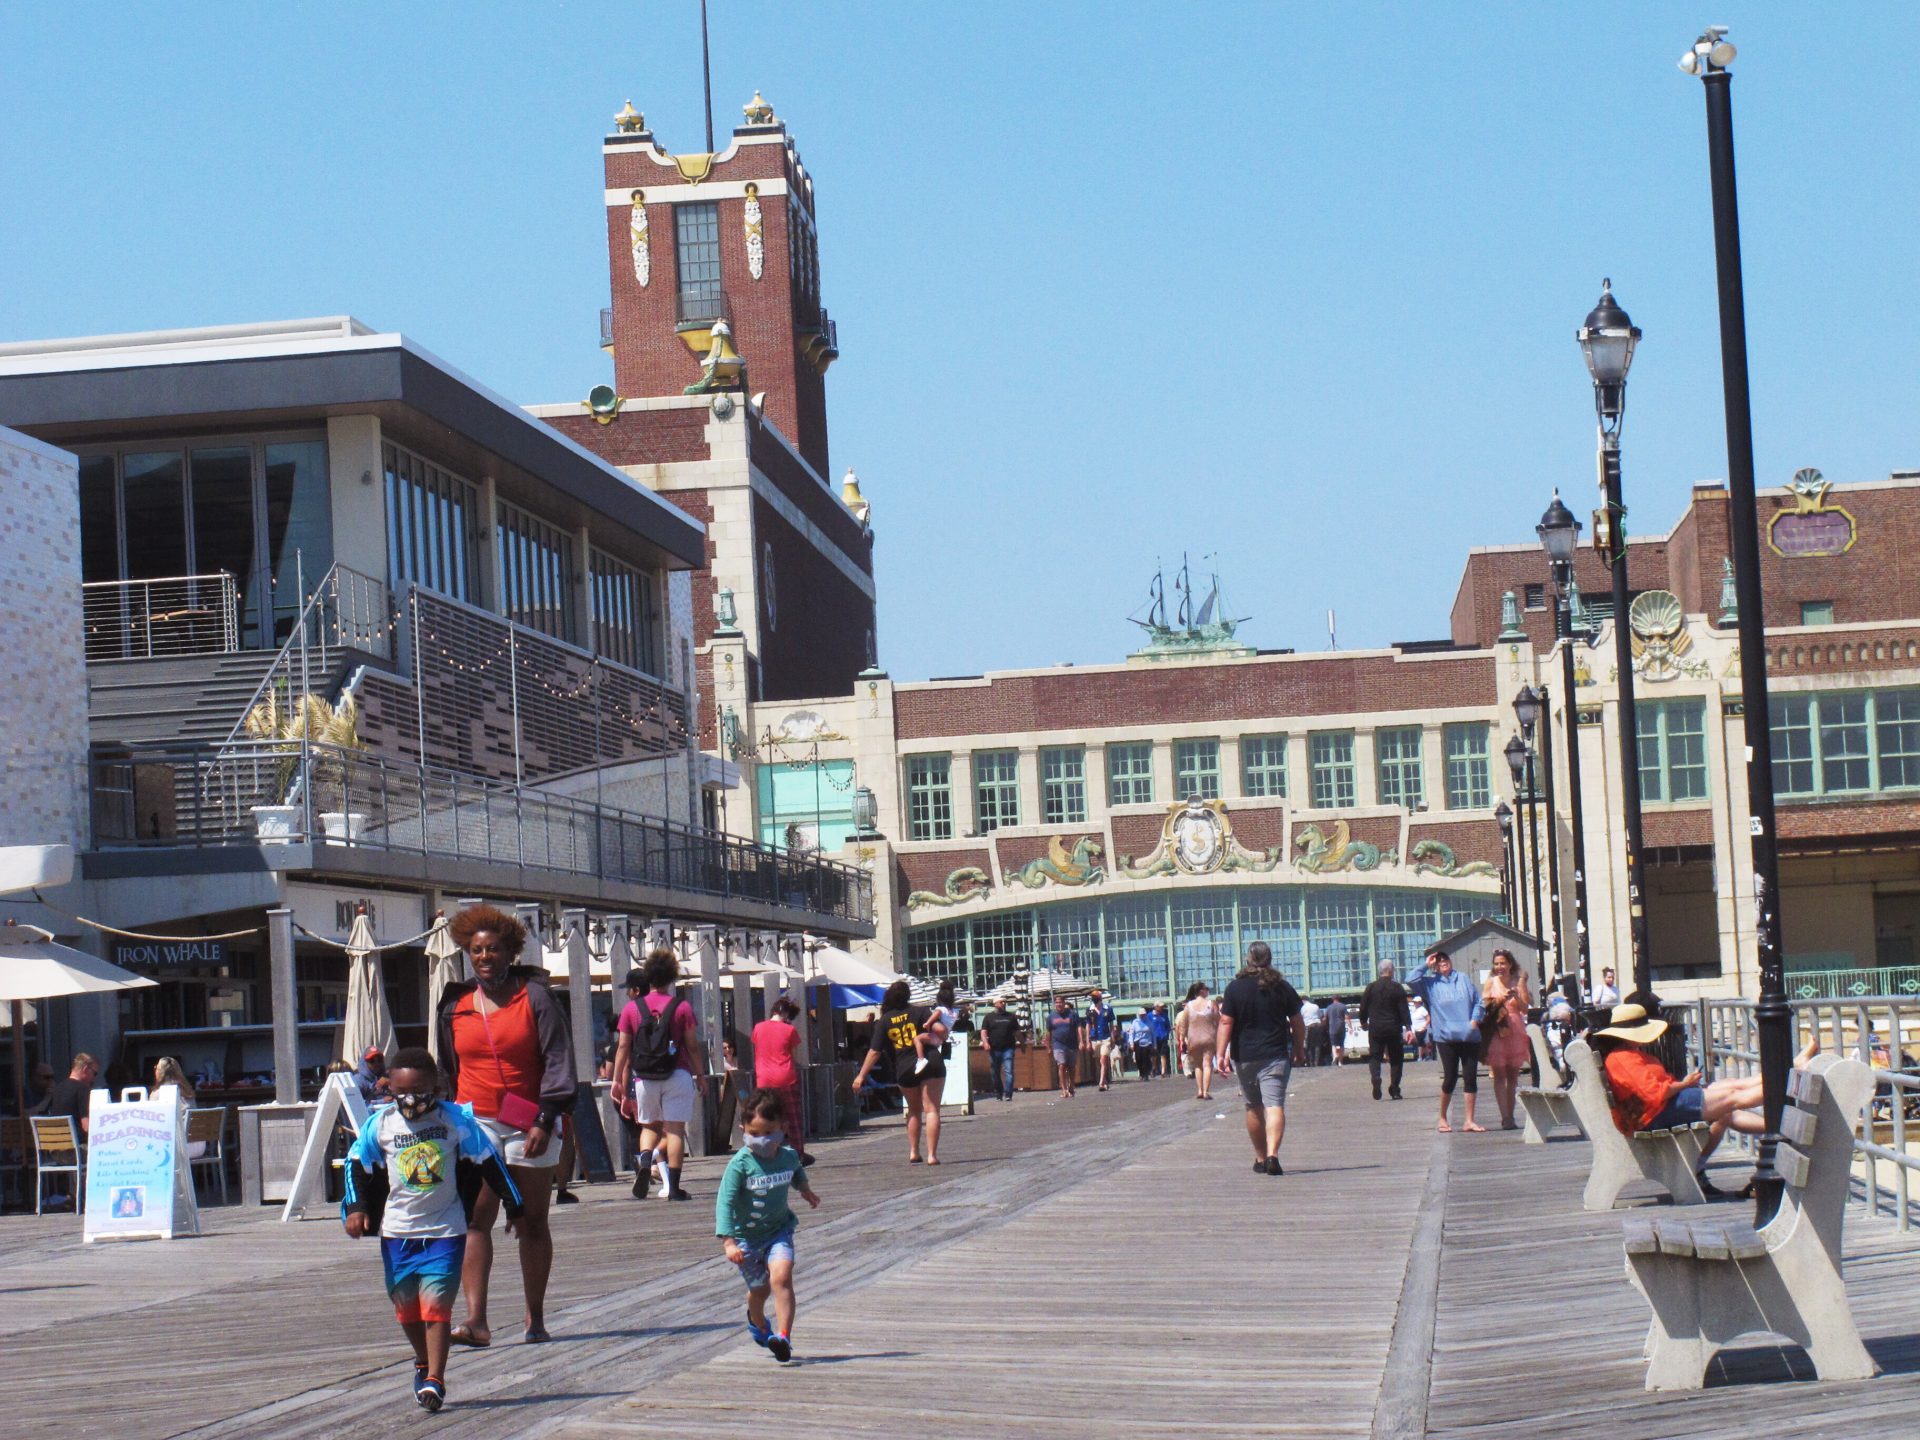 A woman walks with two children on the boardwalk in Asbury Park N.J. on Friday, May 21, 2021. Businesses and residents alike expect this summer at the Jersey Shore to be busier than last year as more people get vaccinated and COVID19 restrictions are scaled back or eliminated.